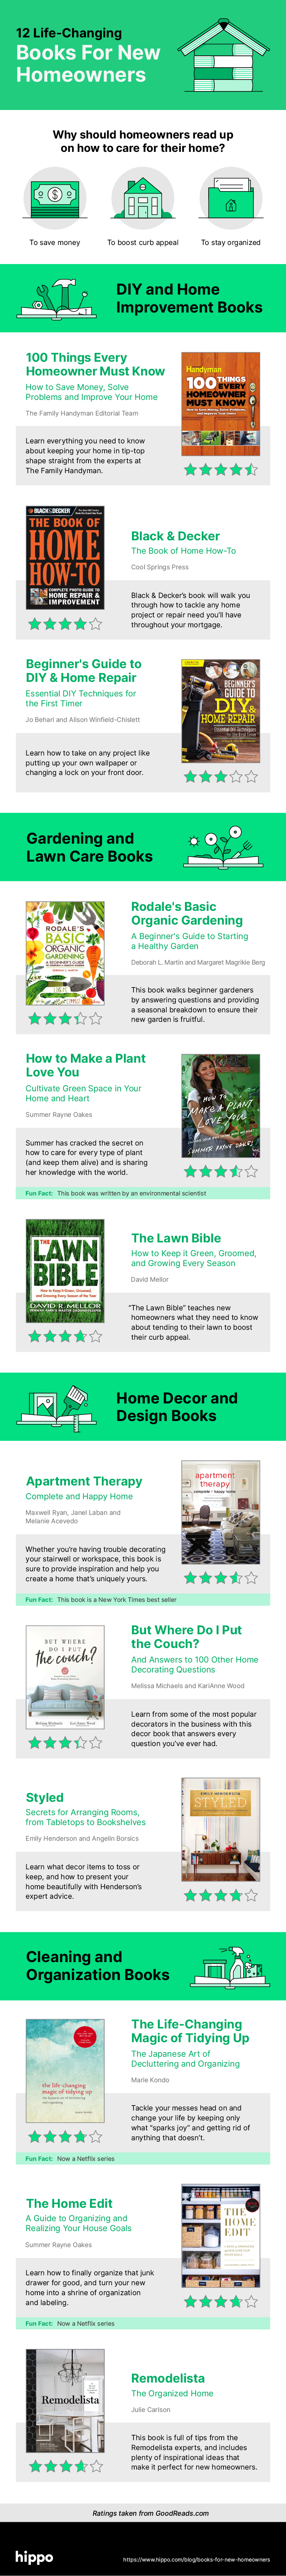 Infographic of books for new homeowners with green illustrations of books